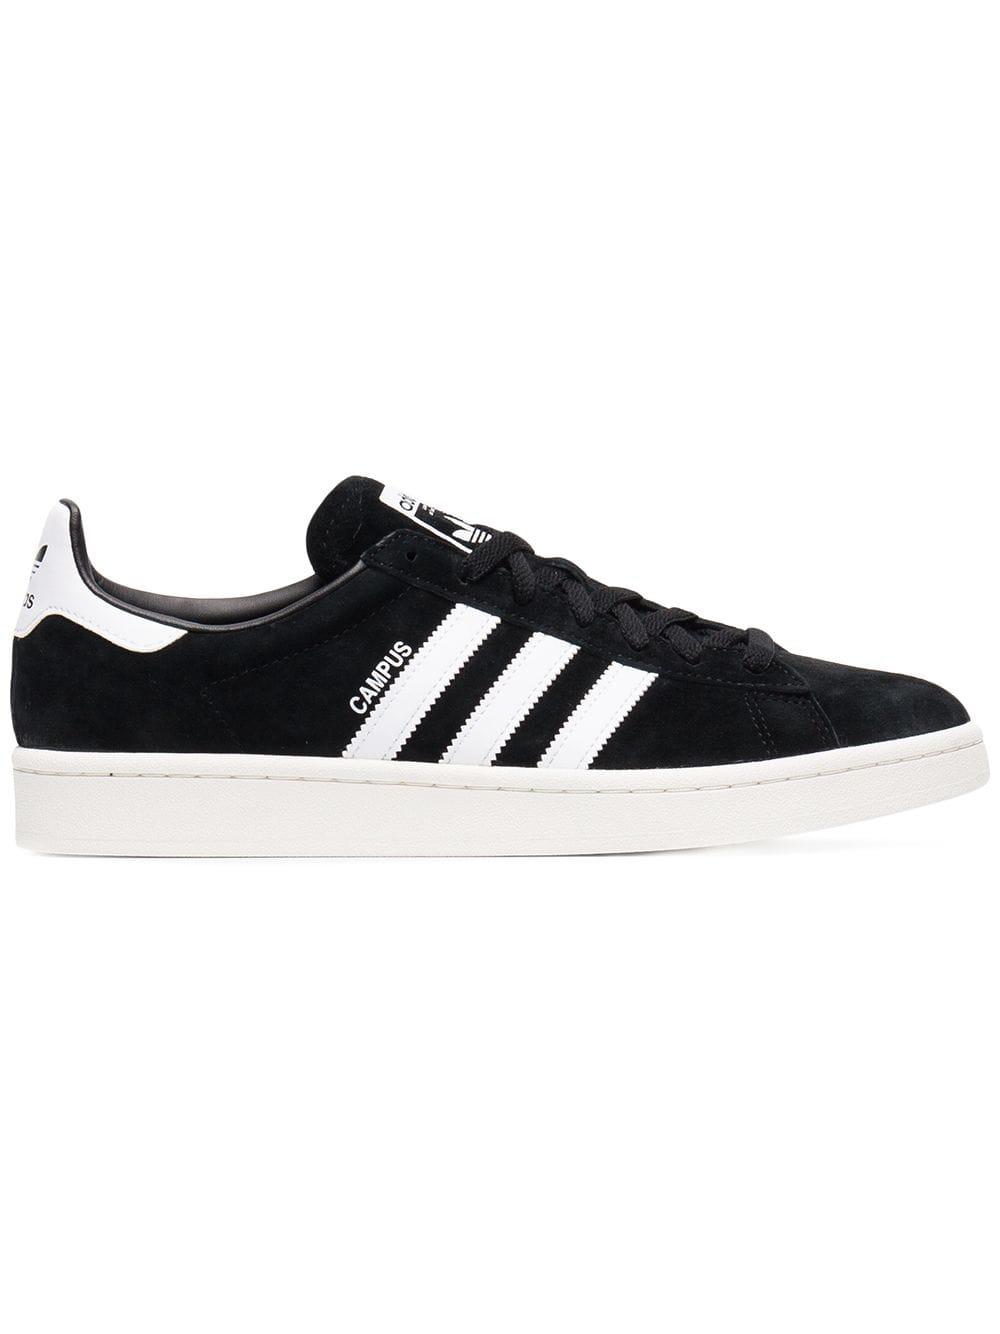 adidas Leather Campus Trianers in Black for Men - Save 65% - Lyst